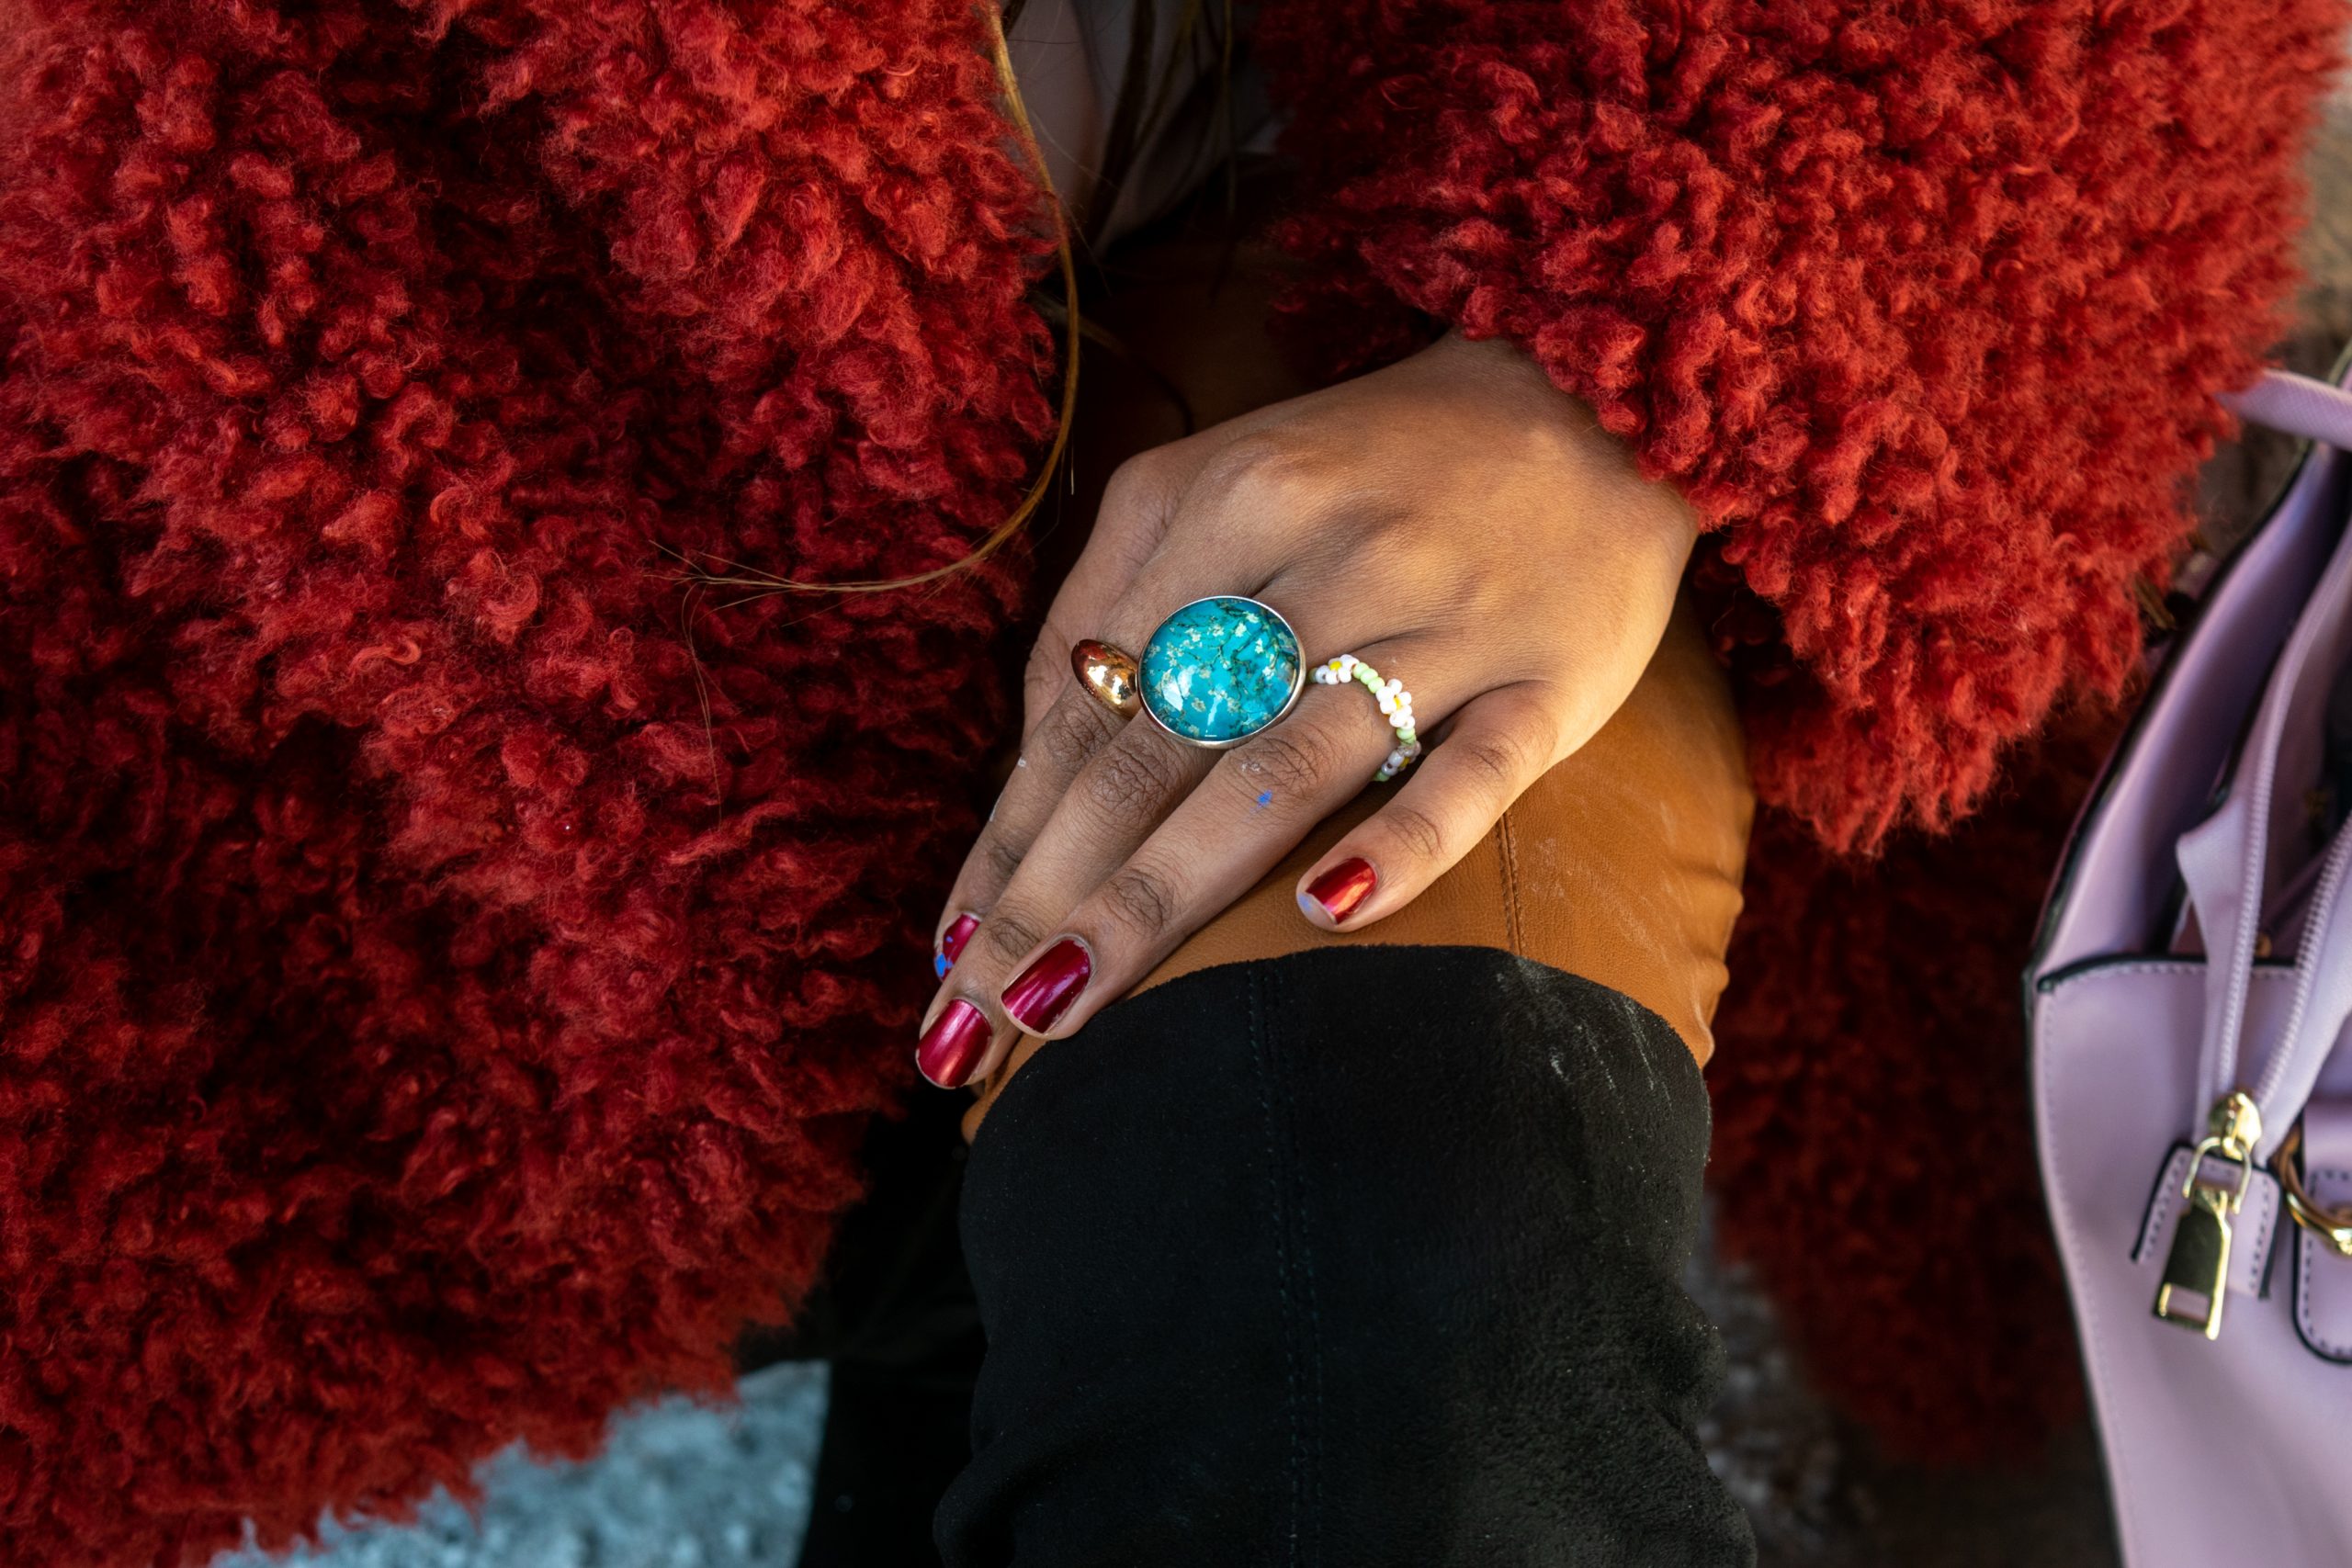 Pérez-Gonzalez adds rings to bring the outfit together.